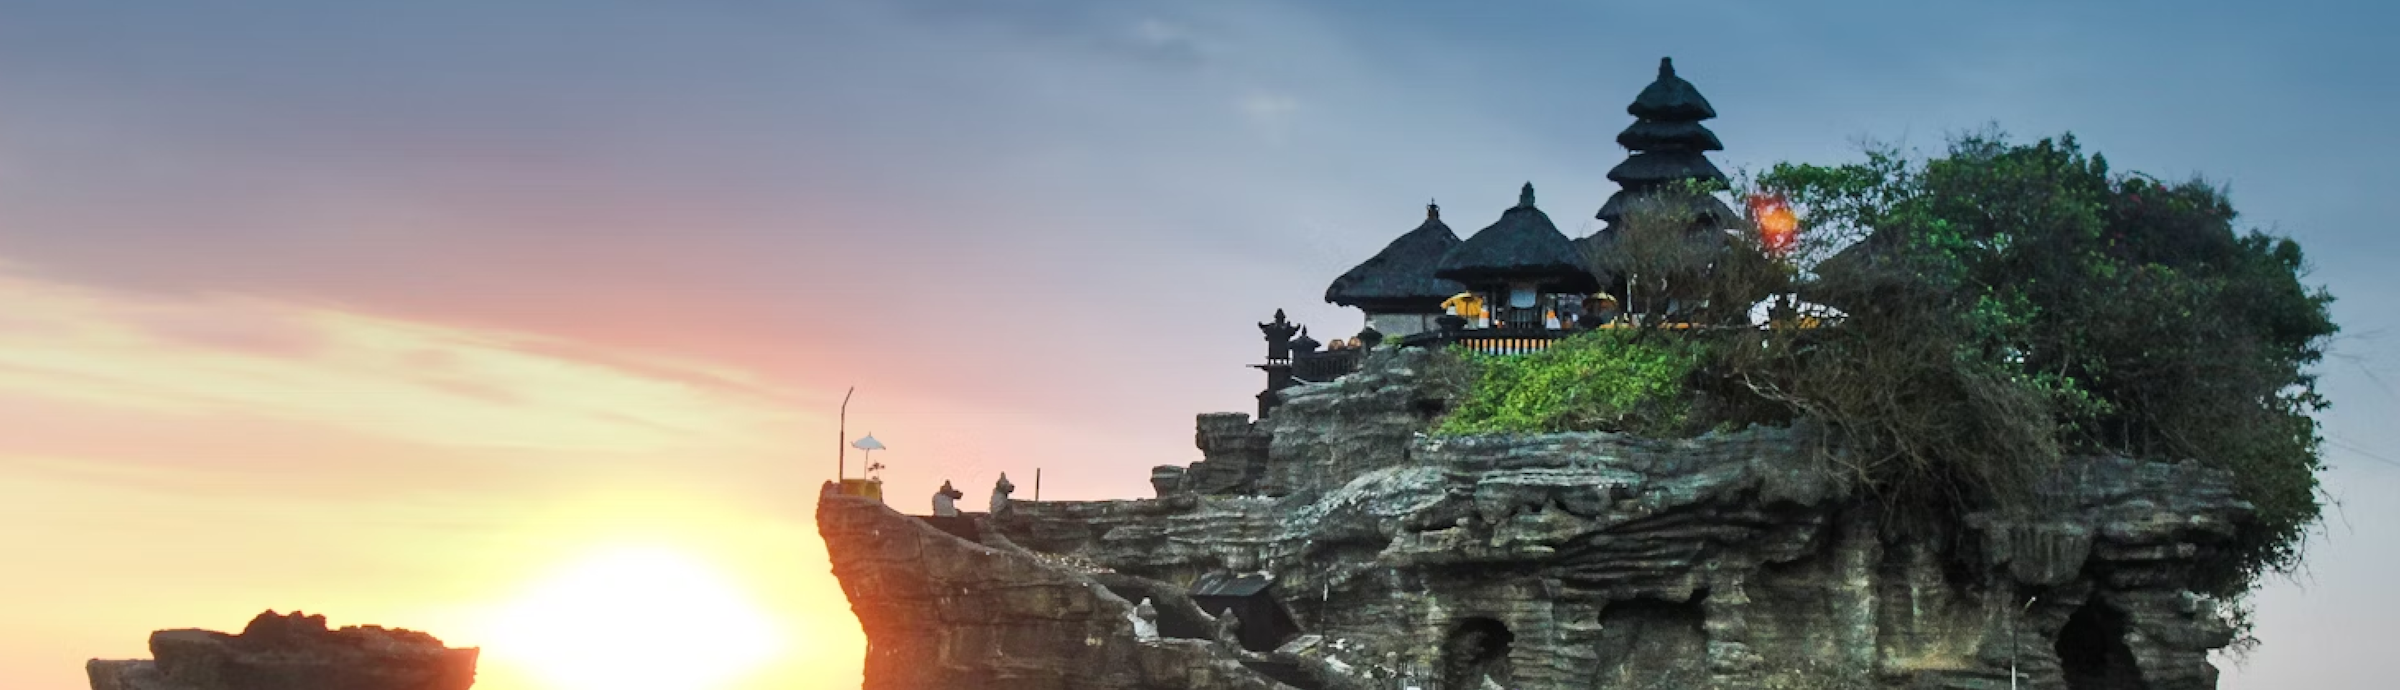 Bali Family Packages